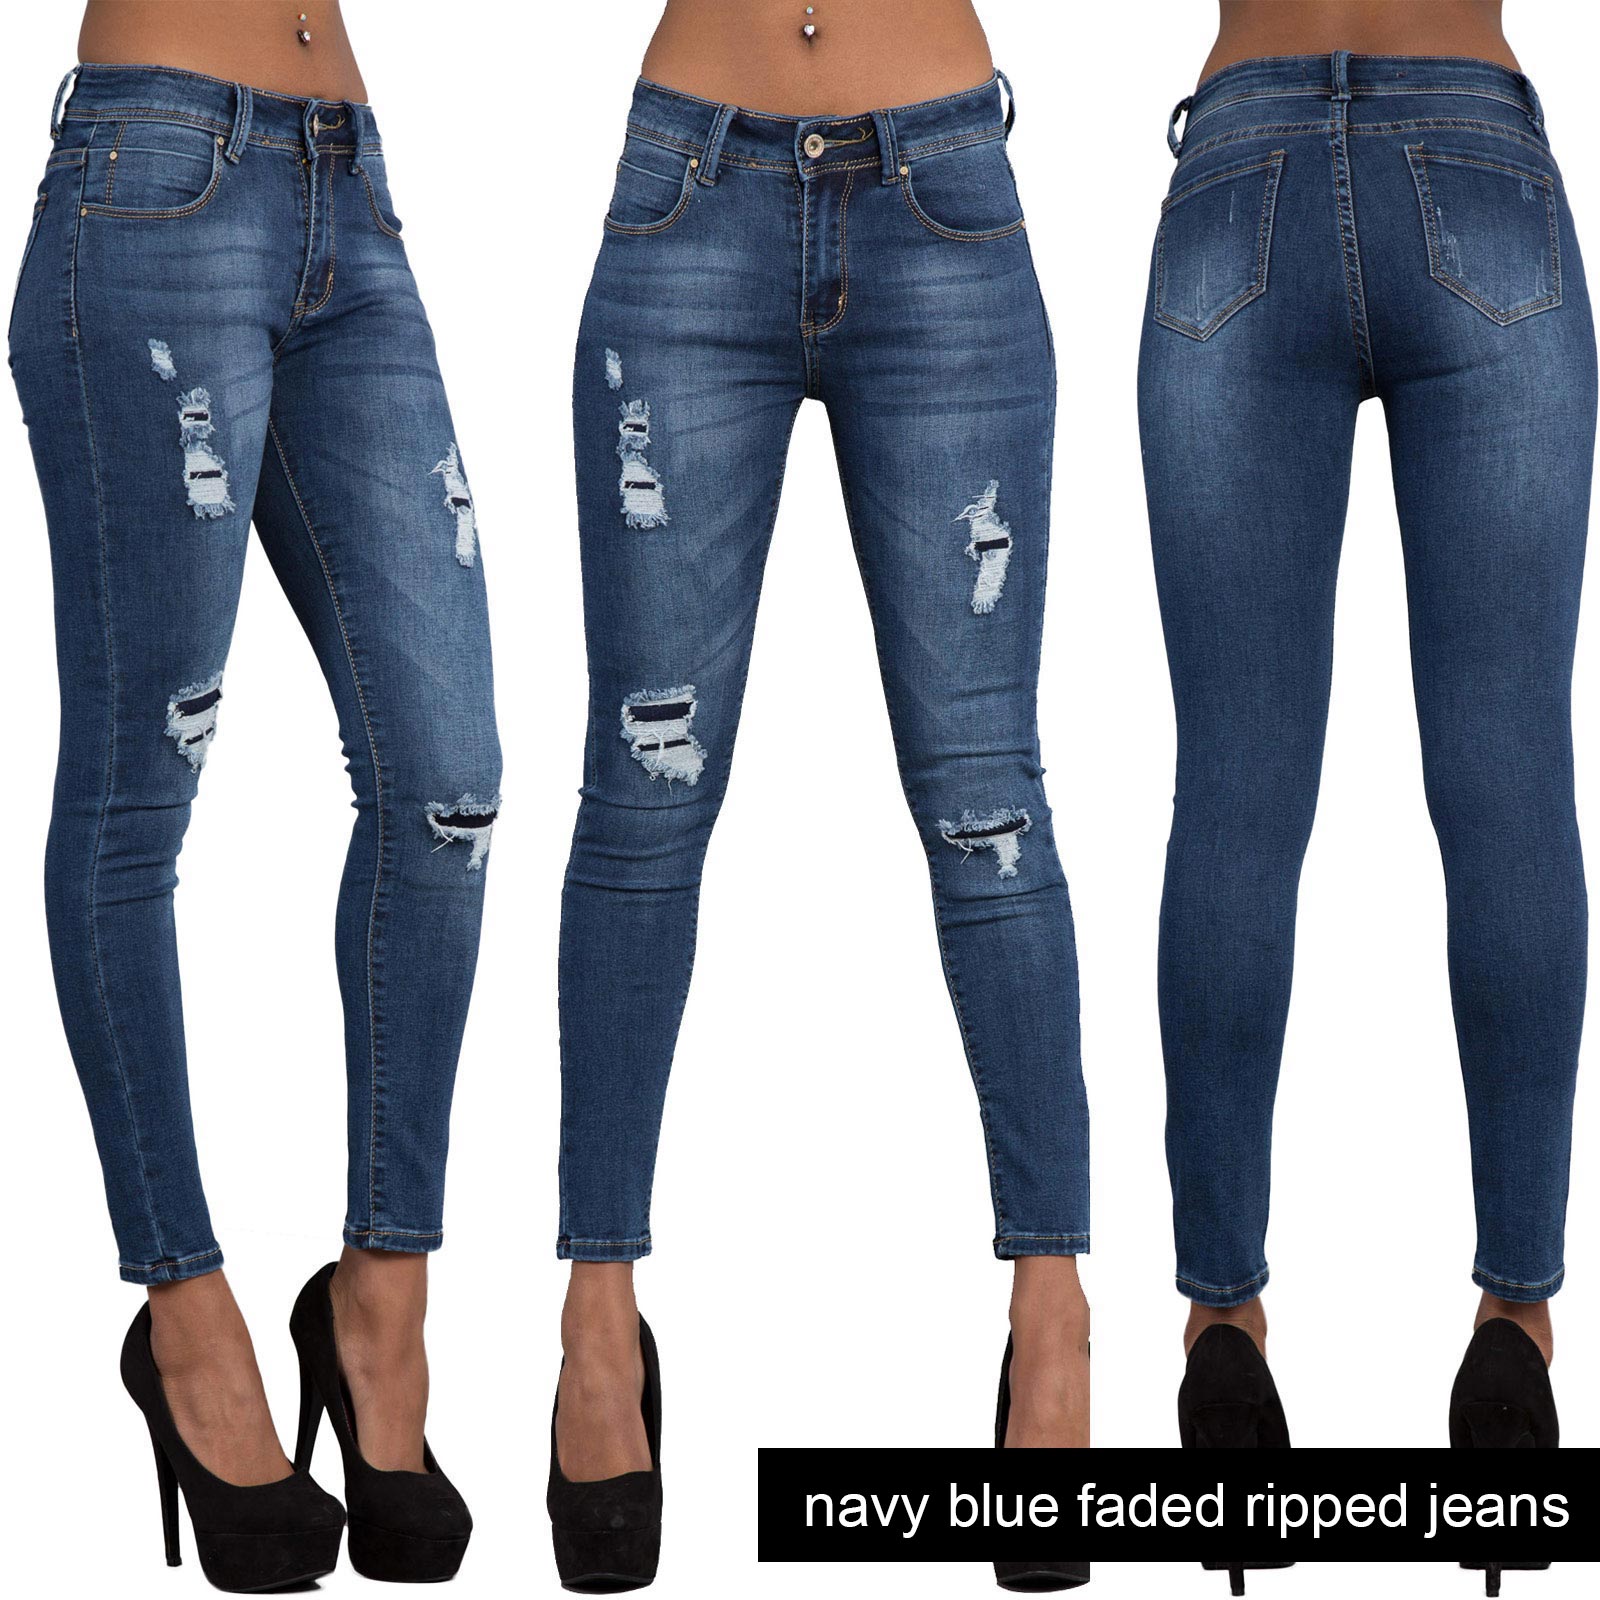 WOMENS LADIES BLACK BLUE SKINNY RIPPED LACE CUT OUT BOW JEANS DENIM ...